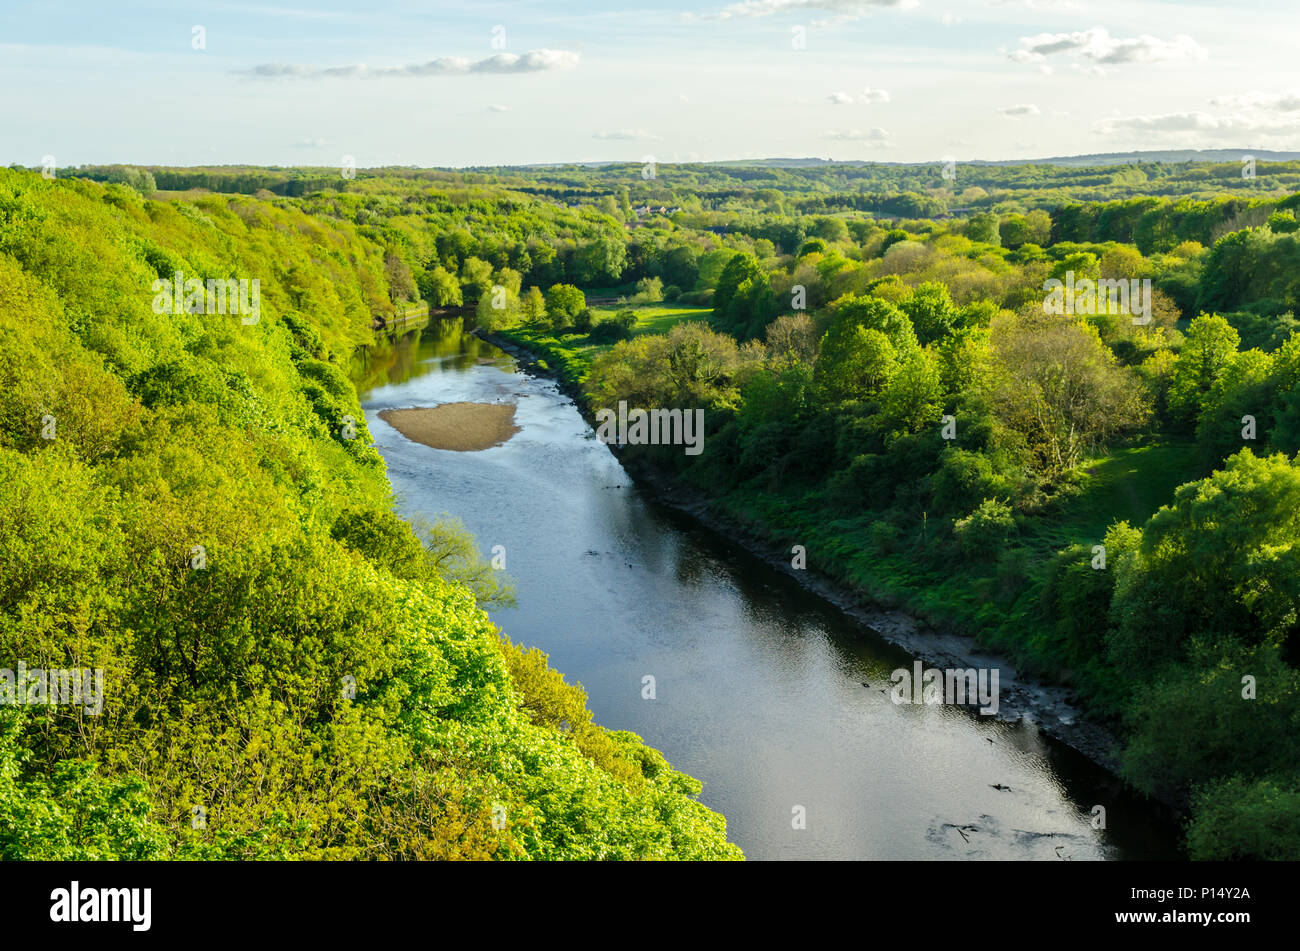 https://c8.alamy.com/comp/P14Y2A/an-aerial-view-of-the-river-wear-at-washington-P14Y2A.jpg